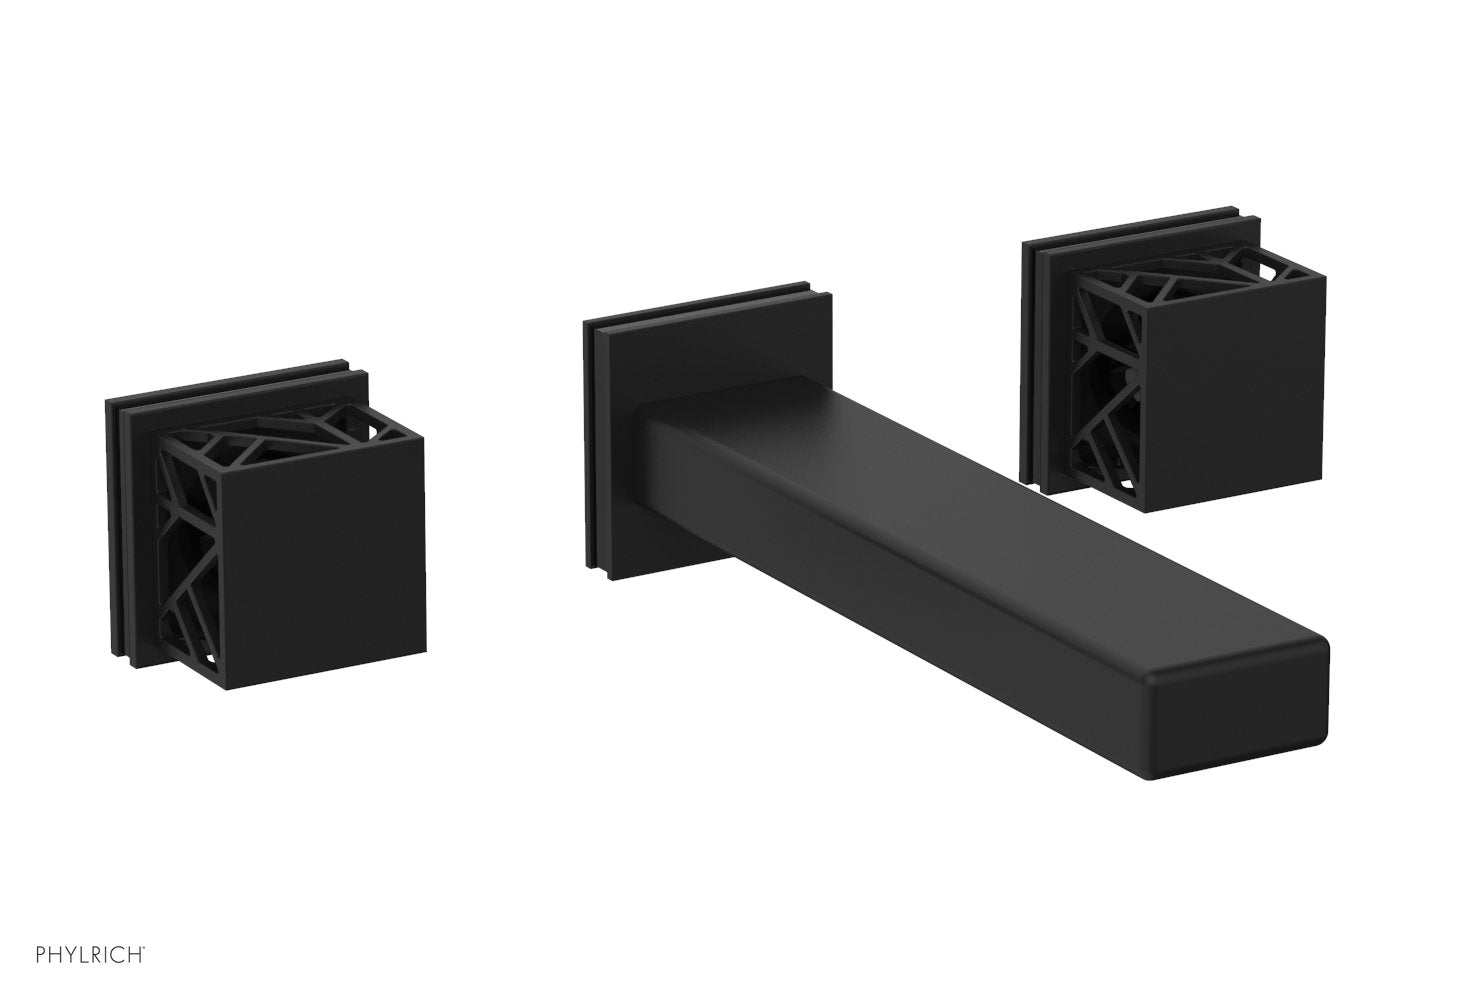 Phylrich JOLIE Wall Lavatory Set - Square Handles with "Black" Accents